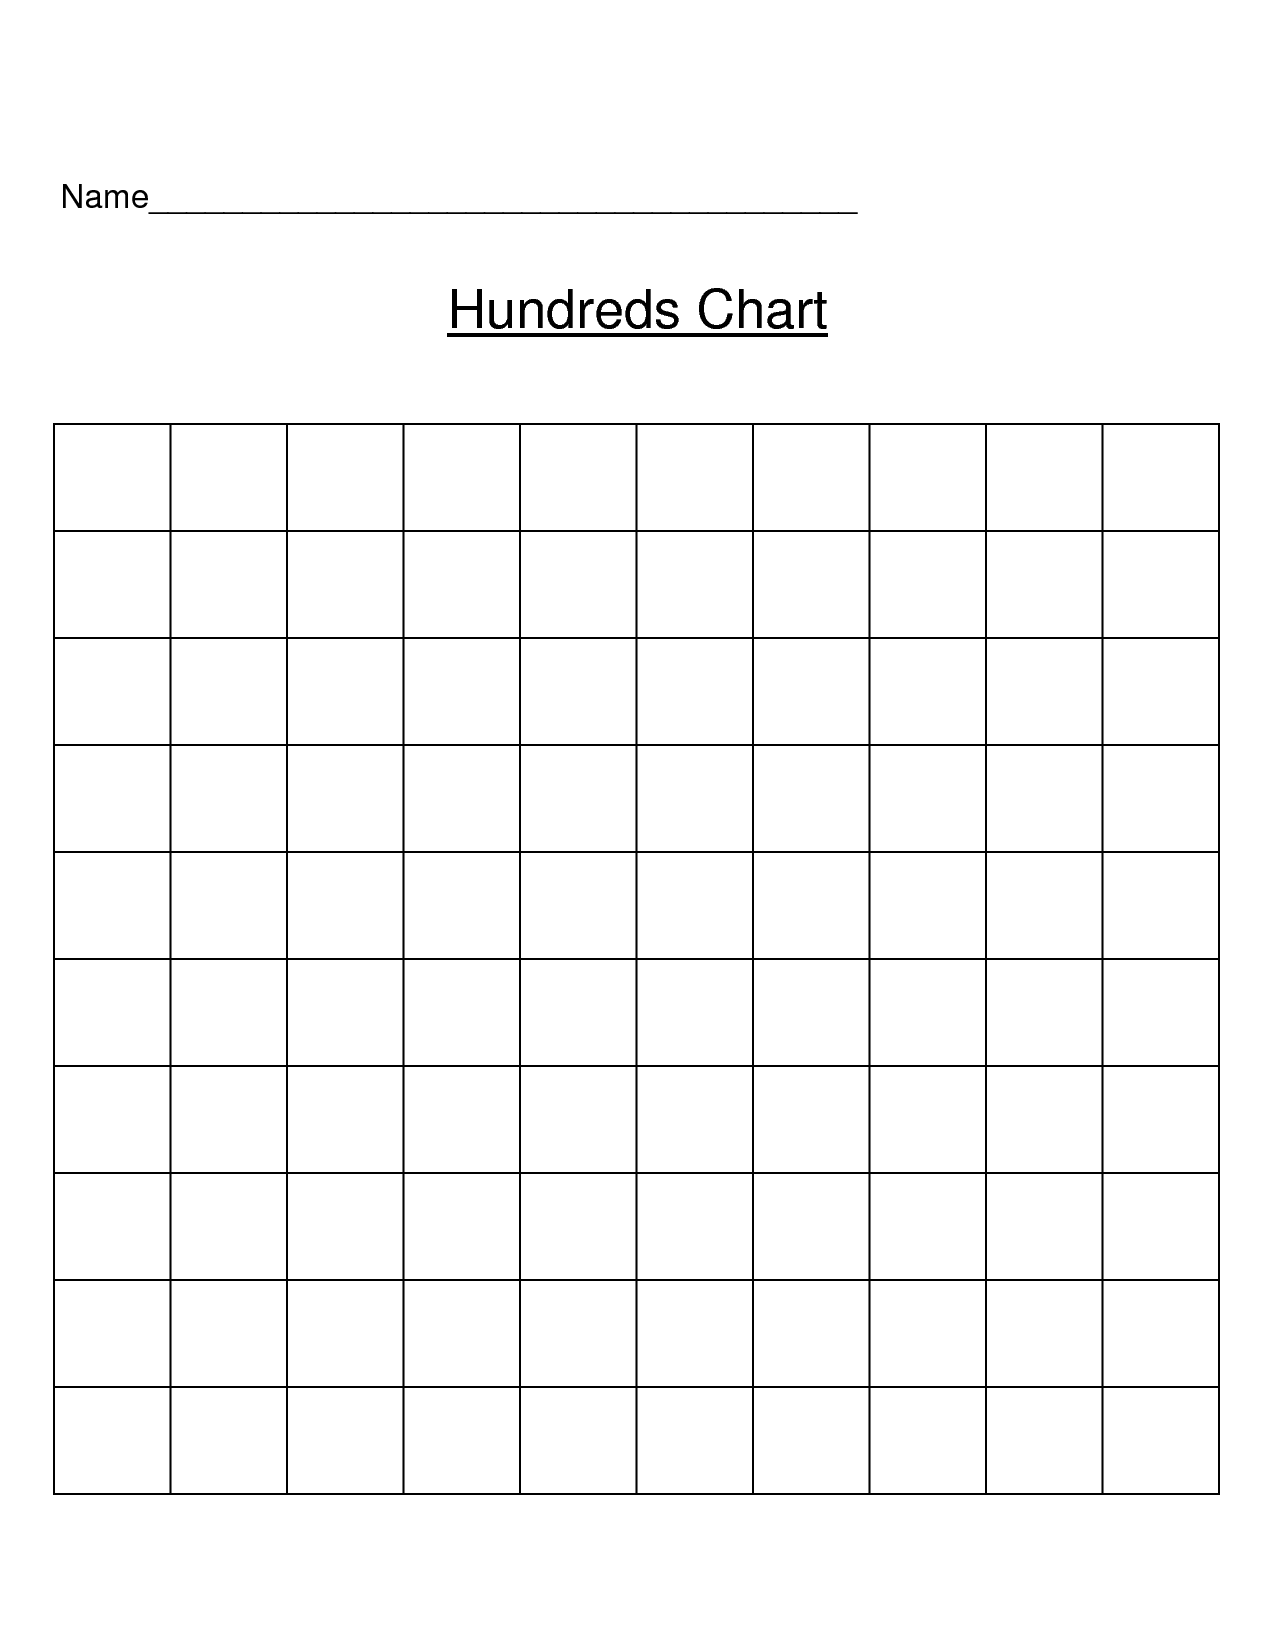 5-best-images-of-printable-blank-50-chart-free-blank-printable-chore-charts-blank-number